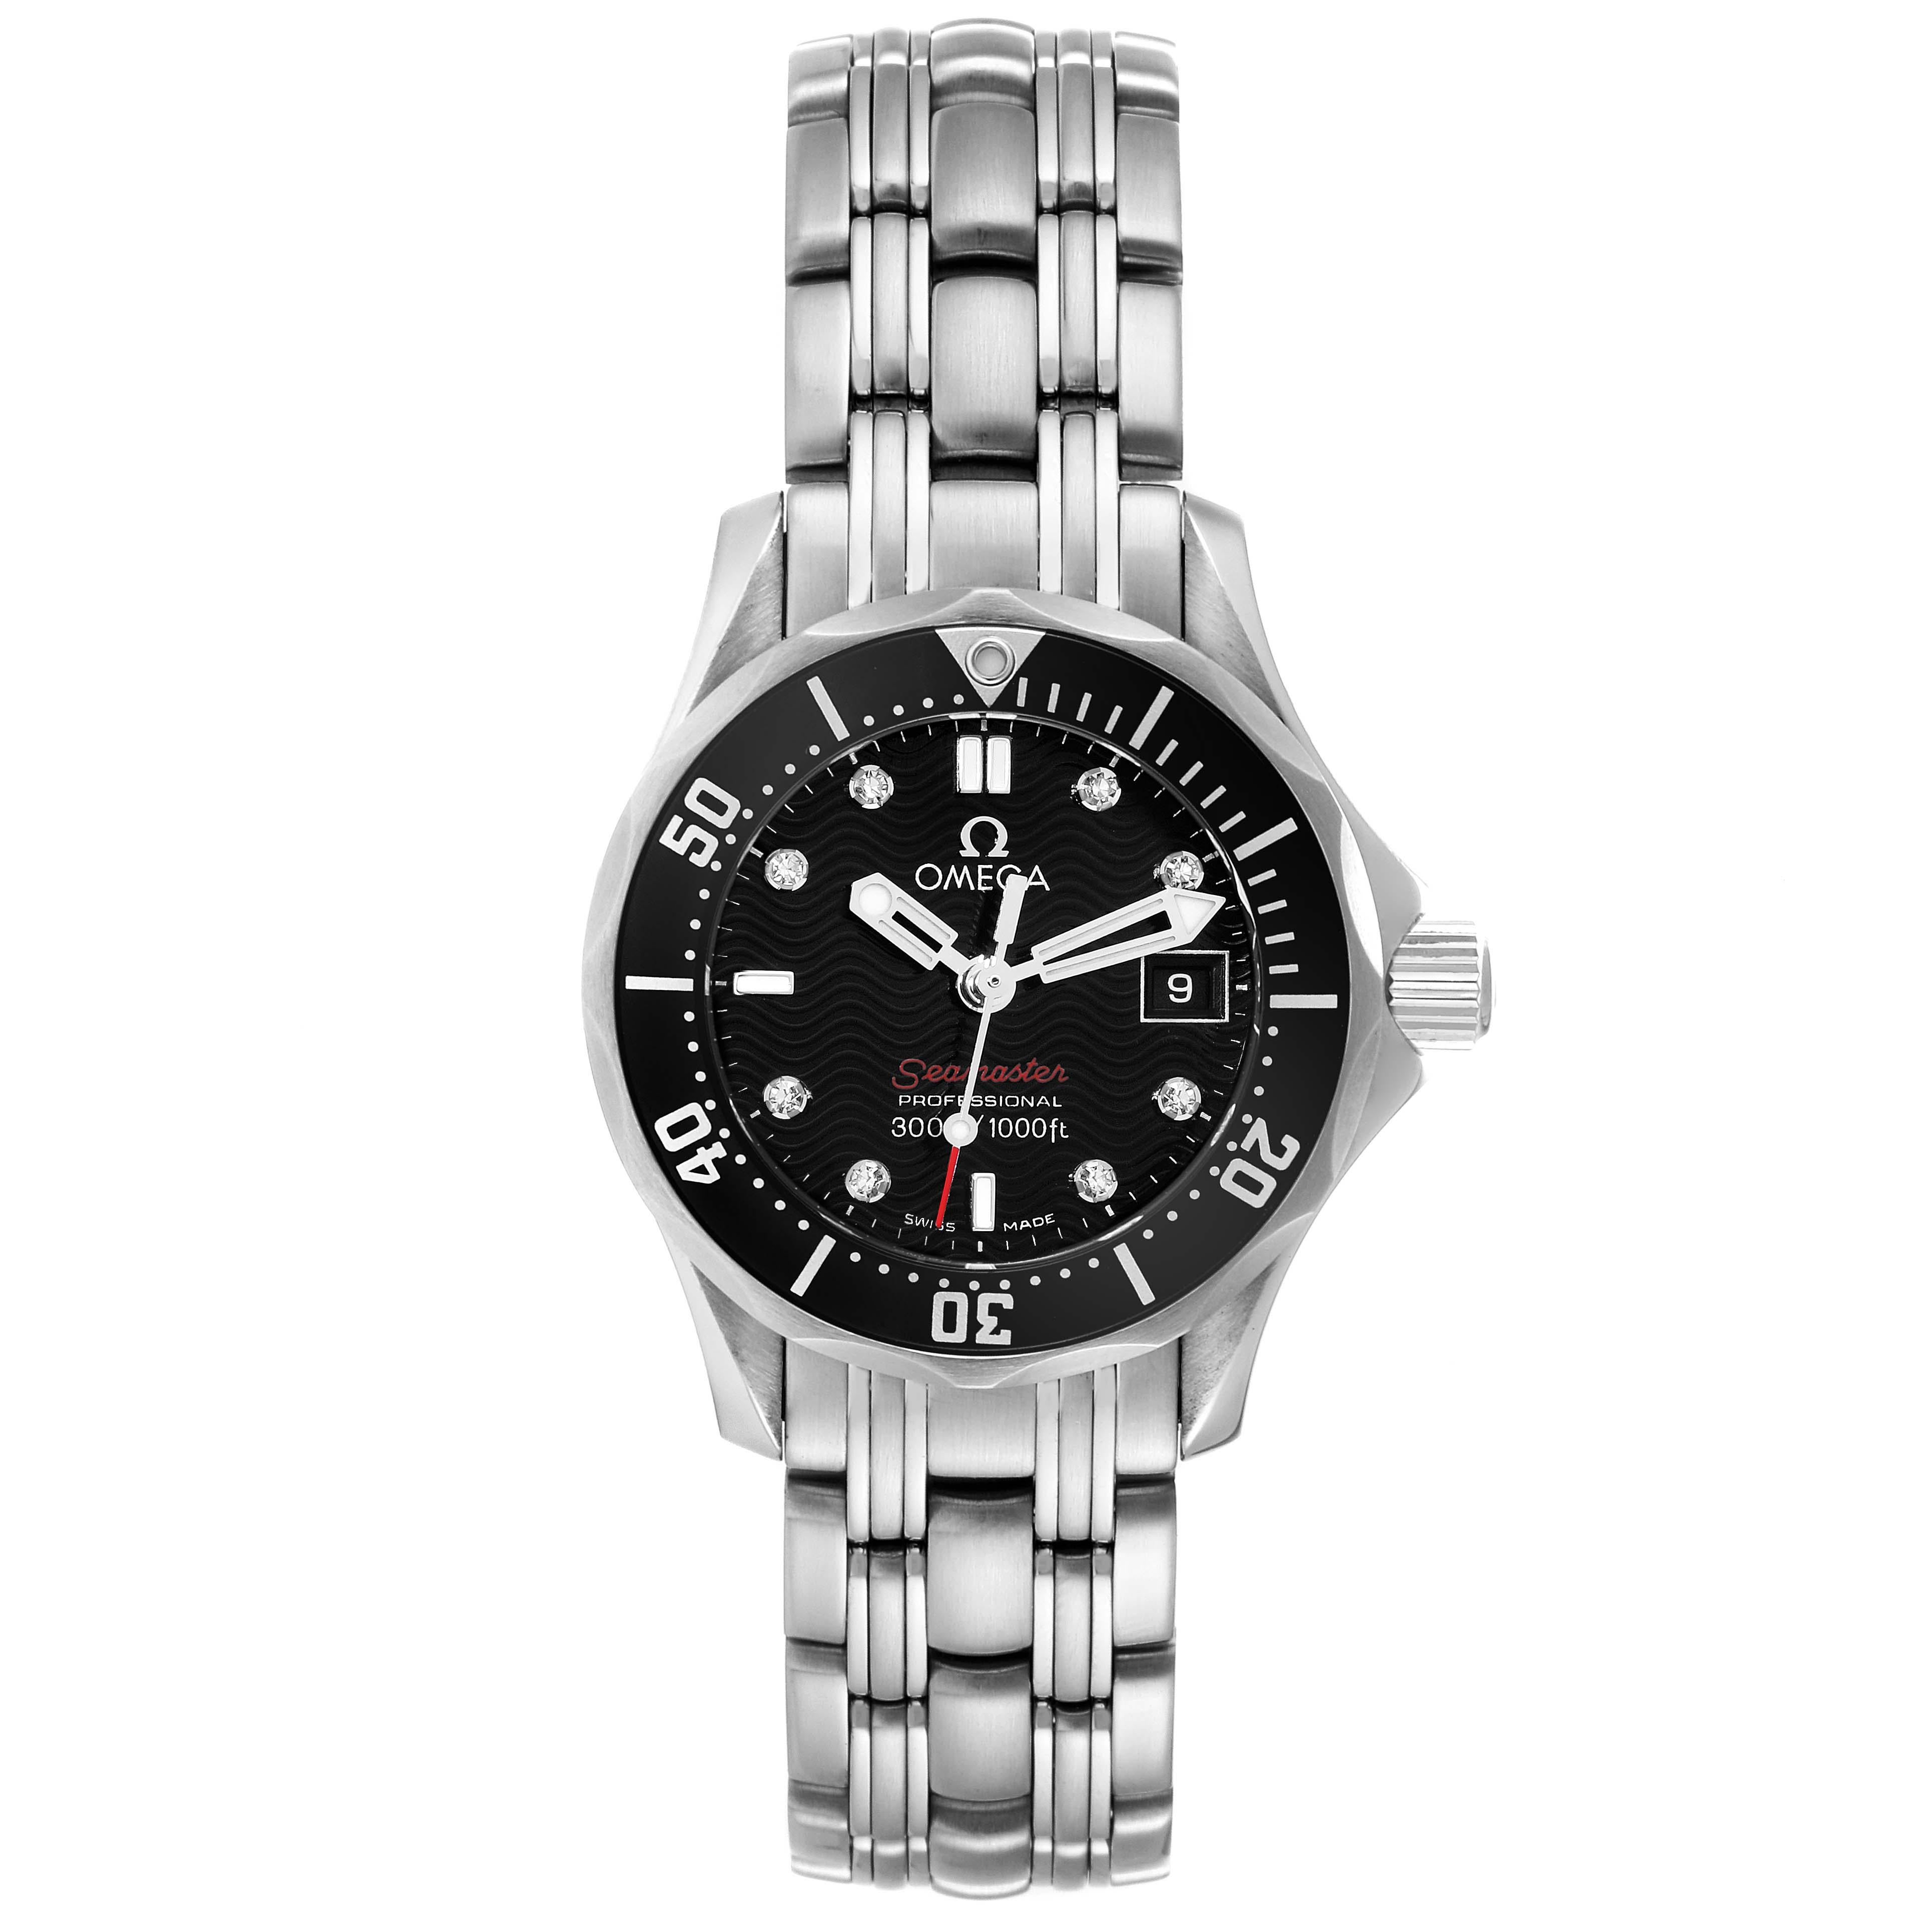 Omega Seamaster Black Diamond Dial Steel Ladies Watch 212.30.28.61.51.001 Card. Quartz movement. Stainless steel round case 28.0 mm in diameter. Black unidirectional rotating bezel. Scratch resistant sapphire crystal. Black wave decor dial with